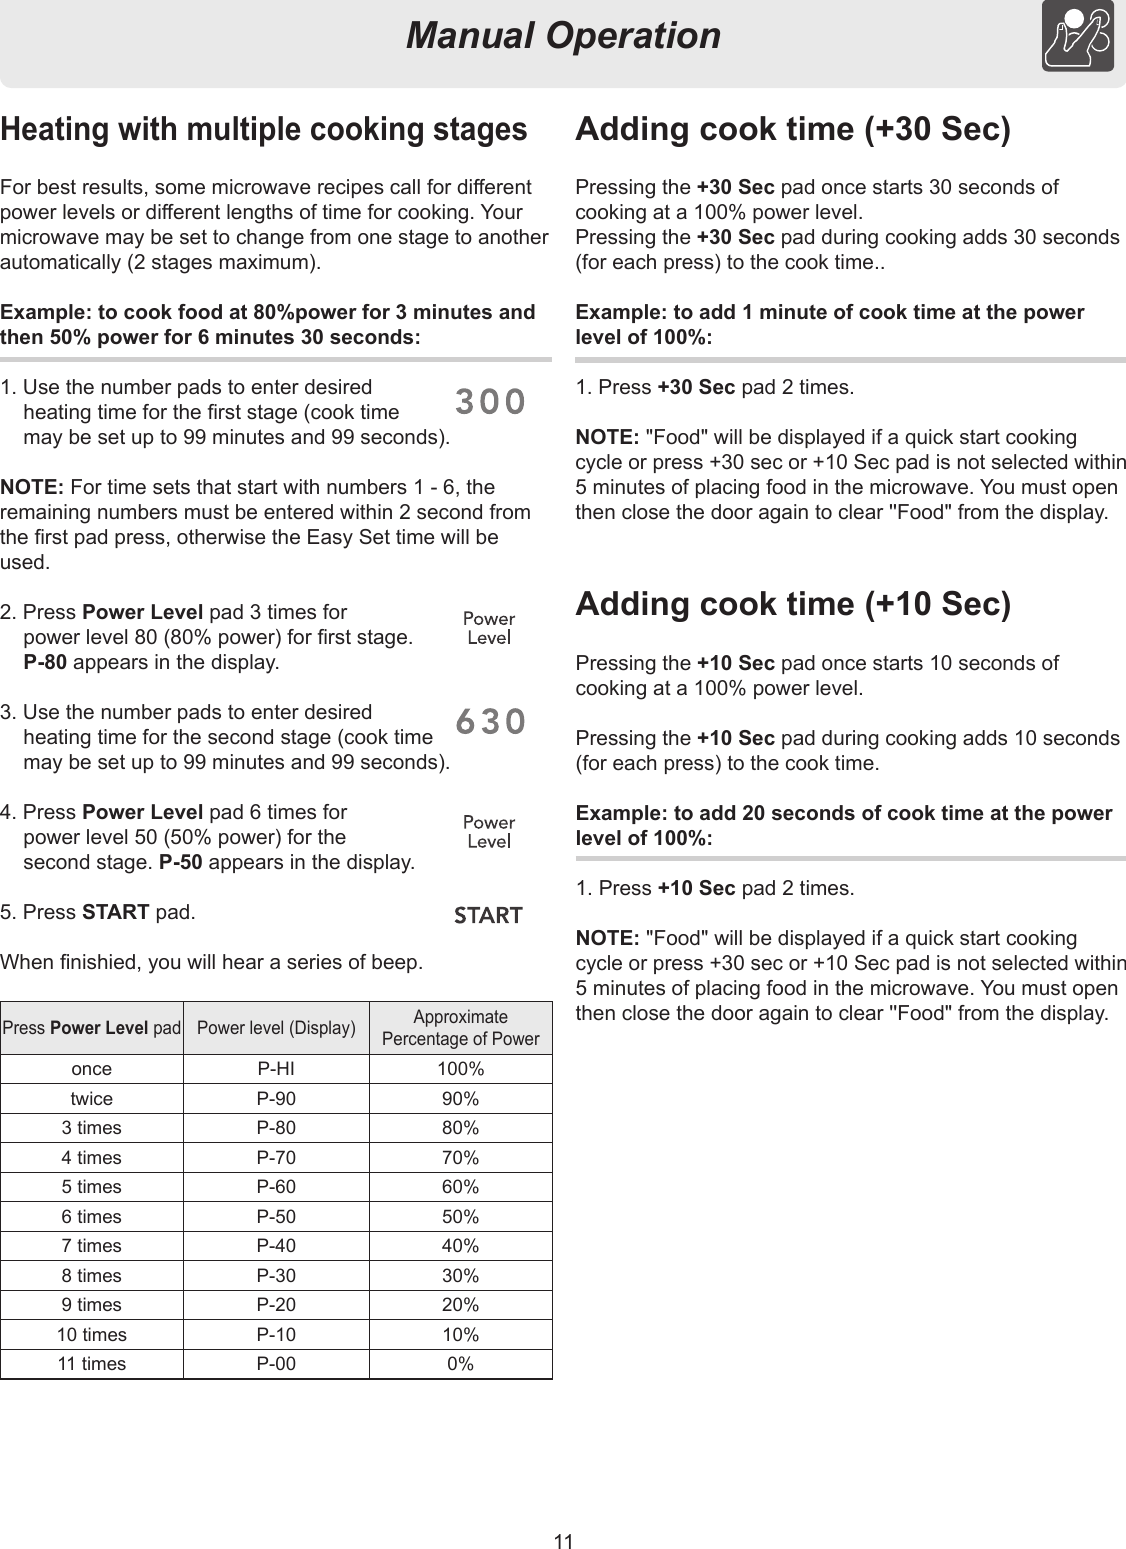 11Manual OperationHeating with multiple cooking stagesFor best results, some microwave recipes call for dierentpower levels or dierent lengths of time for cooking. Yourmicrowave may be set to change from one stage to anotherautomatically (2 stages maximum).Example: to cook food at 80%power for 3 minutes andthen 50% power for 6 minutes 30 seconds:1. Use the number pads to enter desired  heating time for the rst stage (cook time  may be set up to 99 minutes and 99 seconds).NOTE: For time sets that start with numbers 1 - 6, the remaining numbers must be entered within 2 second from the rst pad press, otherwise the Easy Set time will be used.2. Press Power Level pad 3 times for  power level 80 (80% power) for rst stage.  P-80 appears in the display. 3. Use the number pads to enter desired  heating time for the second stage (cook time  may be set up to 99 minutes and 99 seconds).4. Press Power Level pad 6 times for  power level 50 (50% power) for the  second stage. P-50 appears in the display.5. Press START pad.When nishied, you will hear a series of beep.Adding cook time (+30 Sec)Pressing the +30 Sec pad once starts 30 seconds of cooking at a 100% power level.Pressing the +30 Sec pad during cooking adds 30 seconds (for each press) to the cook time..Example: to add 1 minute of cook time at the powerlevel of 100%:1. Press +30 Sec pad 2 times.NOTE: &quot;Food&quot; will be displayed if a quick start cooking cycle or press +30 sec or +10 Sec pad is not selected within 5 minutes of placing food in the microwave. You must open then close the door again to clear &apos;&apos;Food&quot; from the display.Press Power Level pad Power level (Display) Approximate Percentage of Poweronce P-HI 100%twice P-90 90%3 times P-80 80%4 times P-70 70%5 times P-60 60%6 times P-50 50%7 times P-40 40%8 times P-30 30%9 times P-20 20%10 times P-10 10%11 times P-00 0%Adding cook time (+10 Sec)Pressing the +10 Sec pad once starts 10 seconds of cooking at a 100% power level.Pressing the +10 Sec pad during cooking adds 10 seconds (for each press) to the cook time.Example: to add 20 seconds of cook time at the powerlevel of 100%:1. Press +10 Sec pad 2 times.NOTE: &quot;Food&quot; will be displayed if a quick start cooking cycle or press +30 sec or +10 Sec pad is not selected within 5 minutes of placing food in the microwave. You must open then close the door again to clear &apos;&apos;Food&quot; from the display.